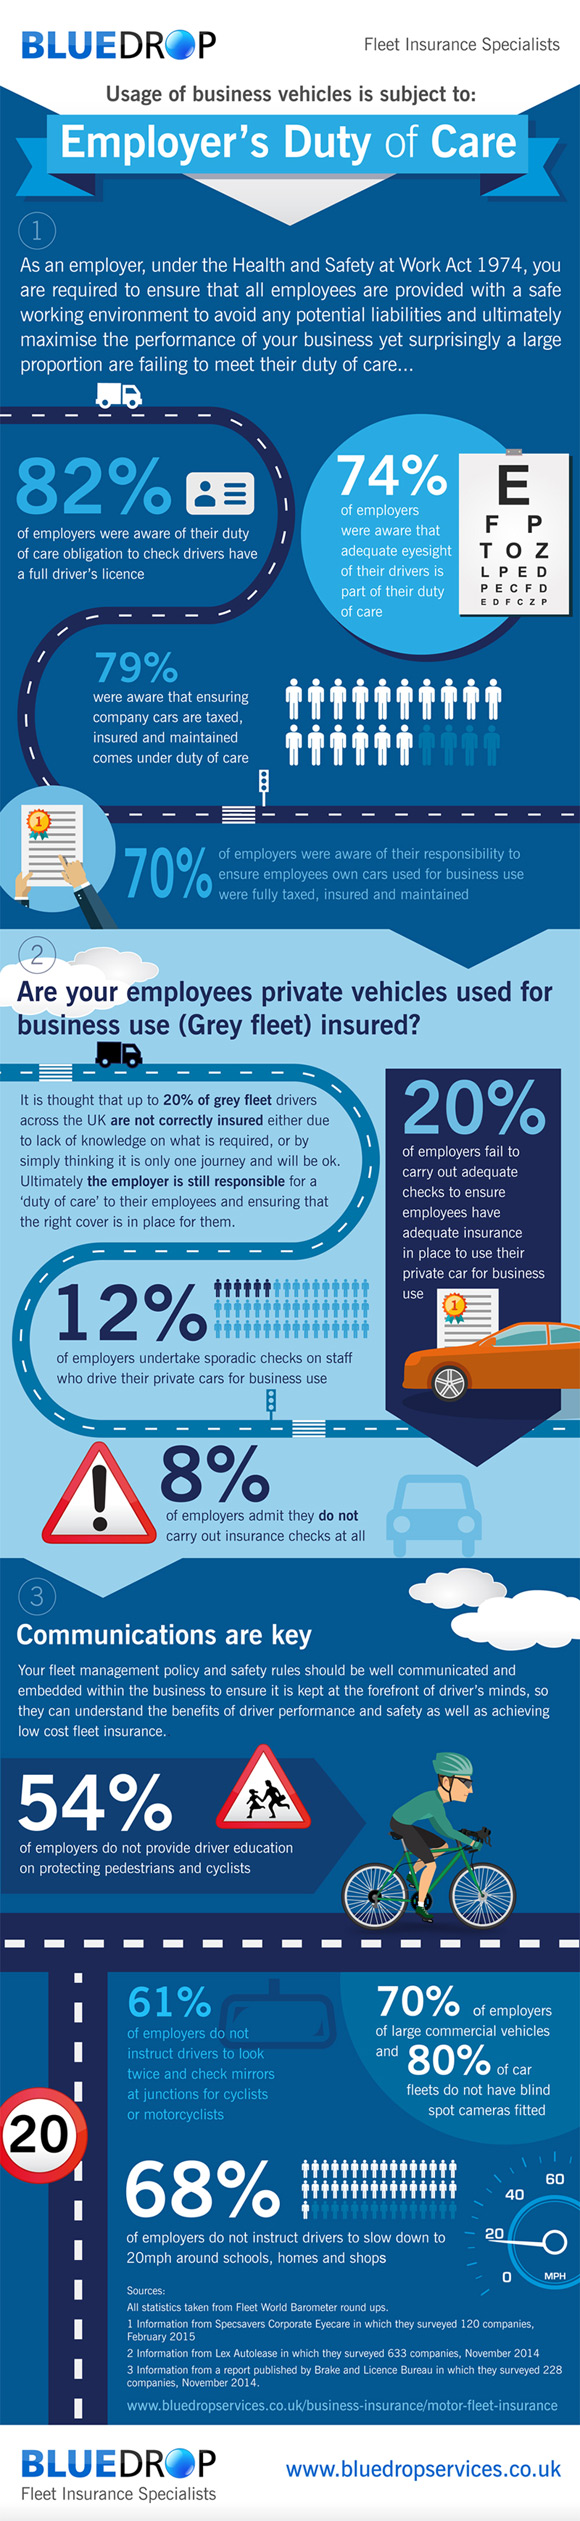 Employer's Duty of Care on business vehicles infographic